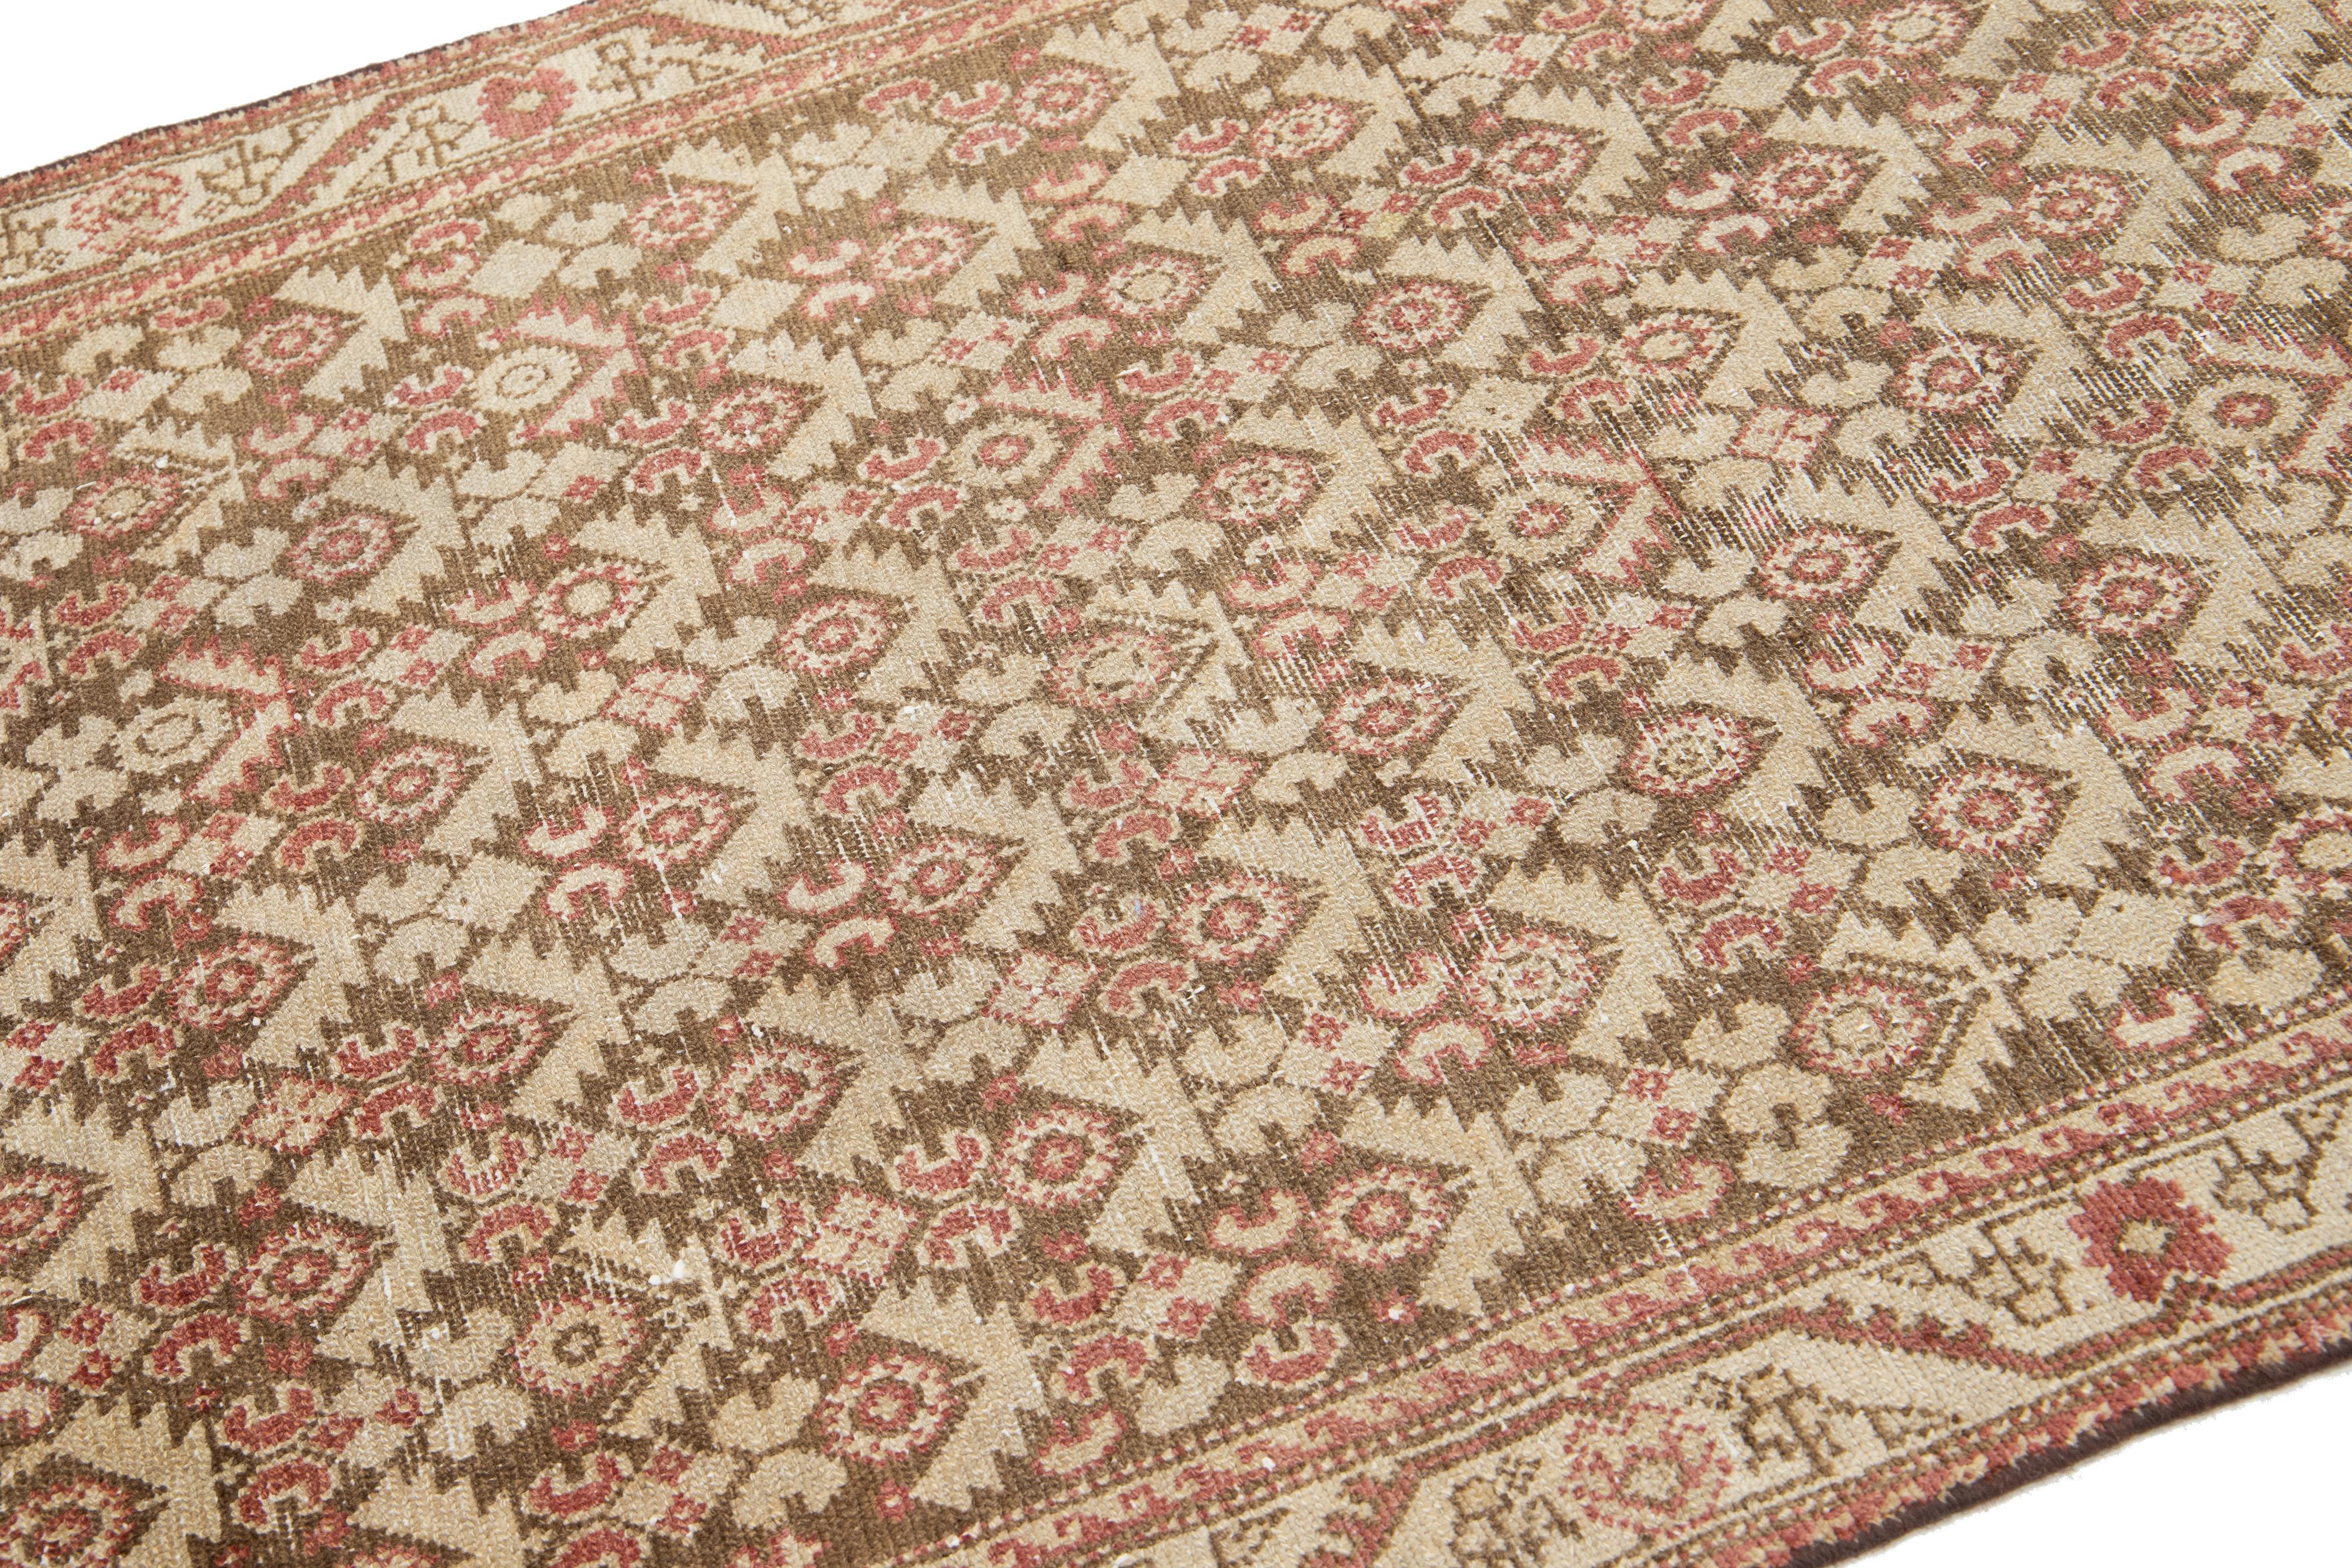 Brown Handmade Persian Malayer Wool Rug with Allover Pattern  In Excellent Condition For Sale In Norwalk, CT